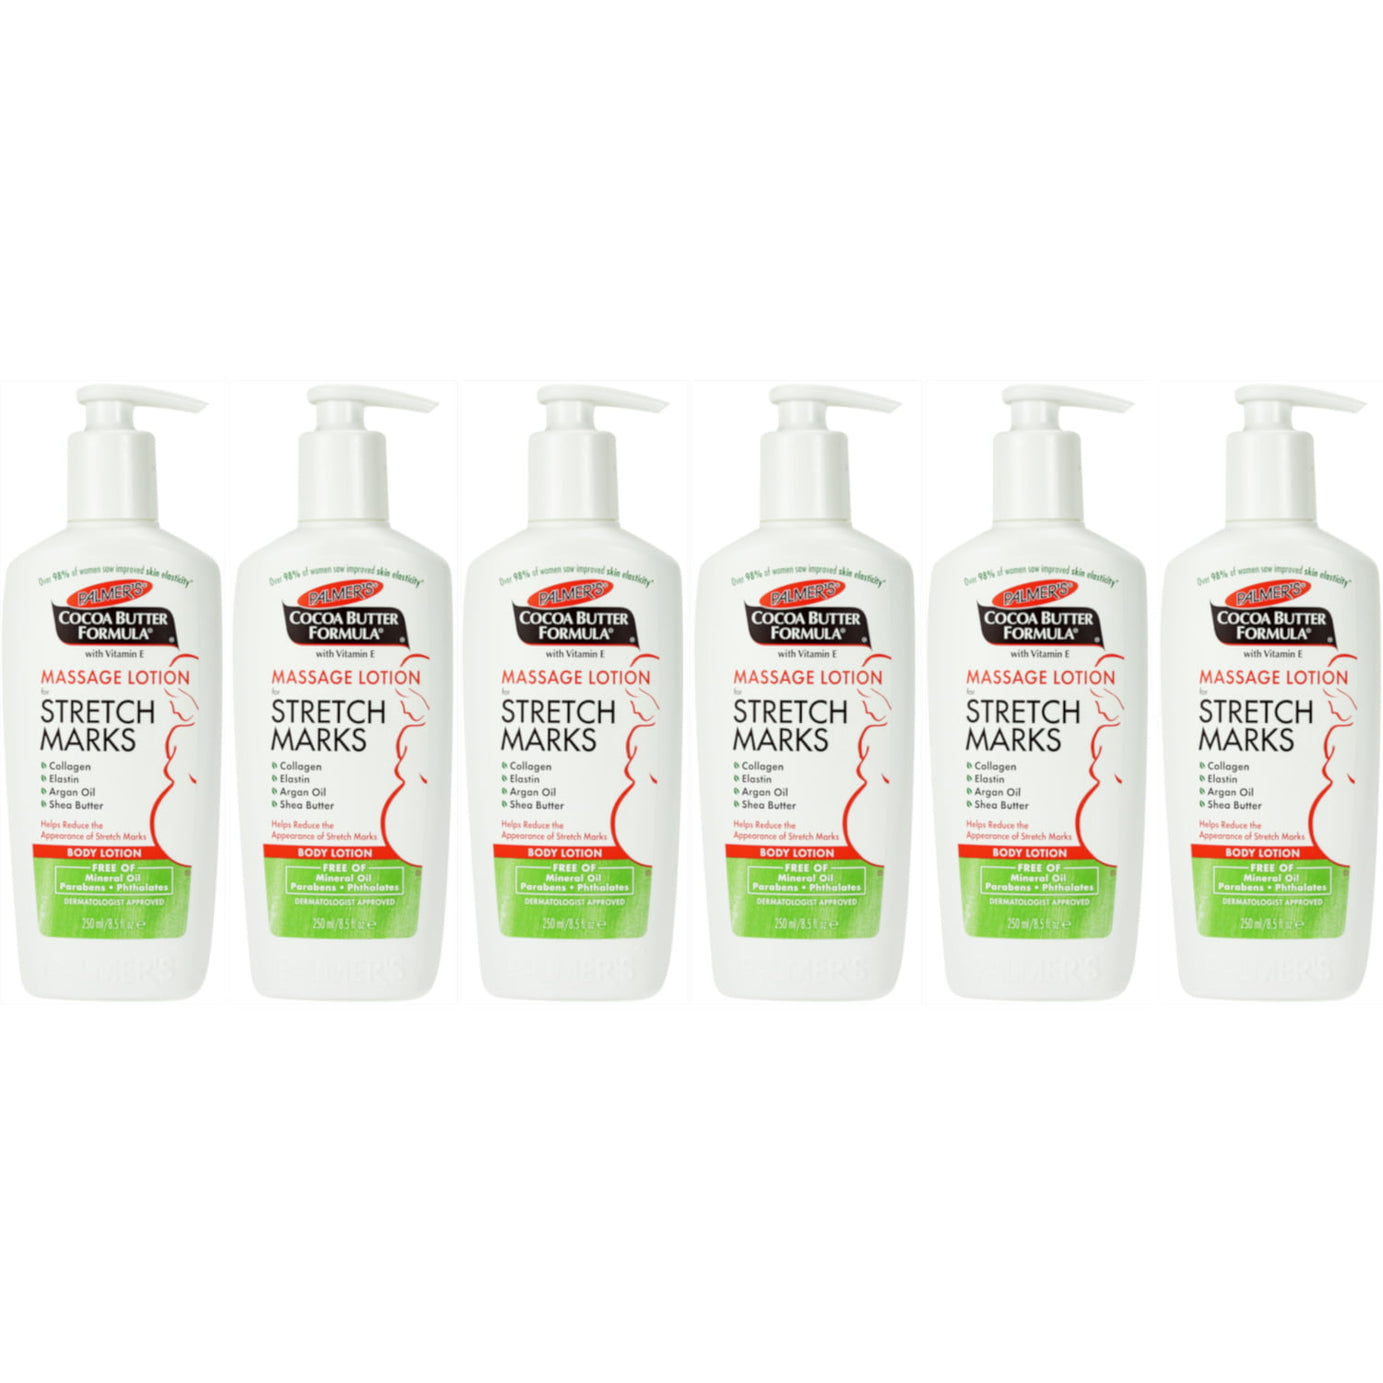 Palmers Cocoa Butter Formula Massage Lotion for Stretch Marks, 8.5 oz Pump (6 Pack)